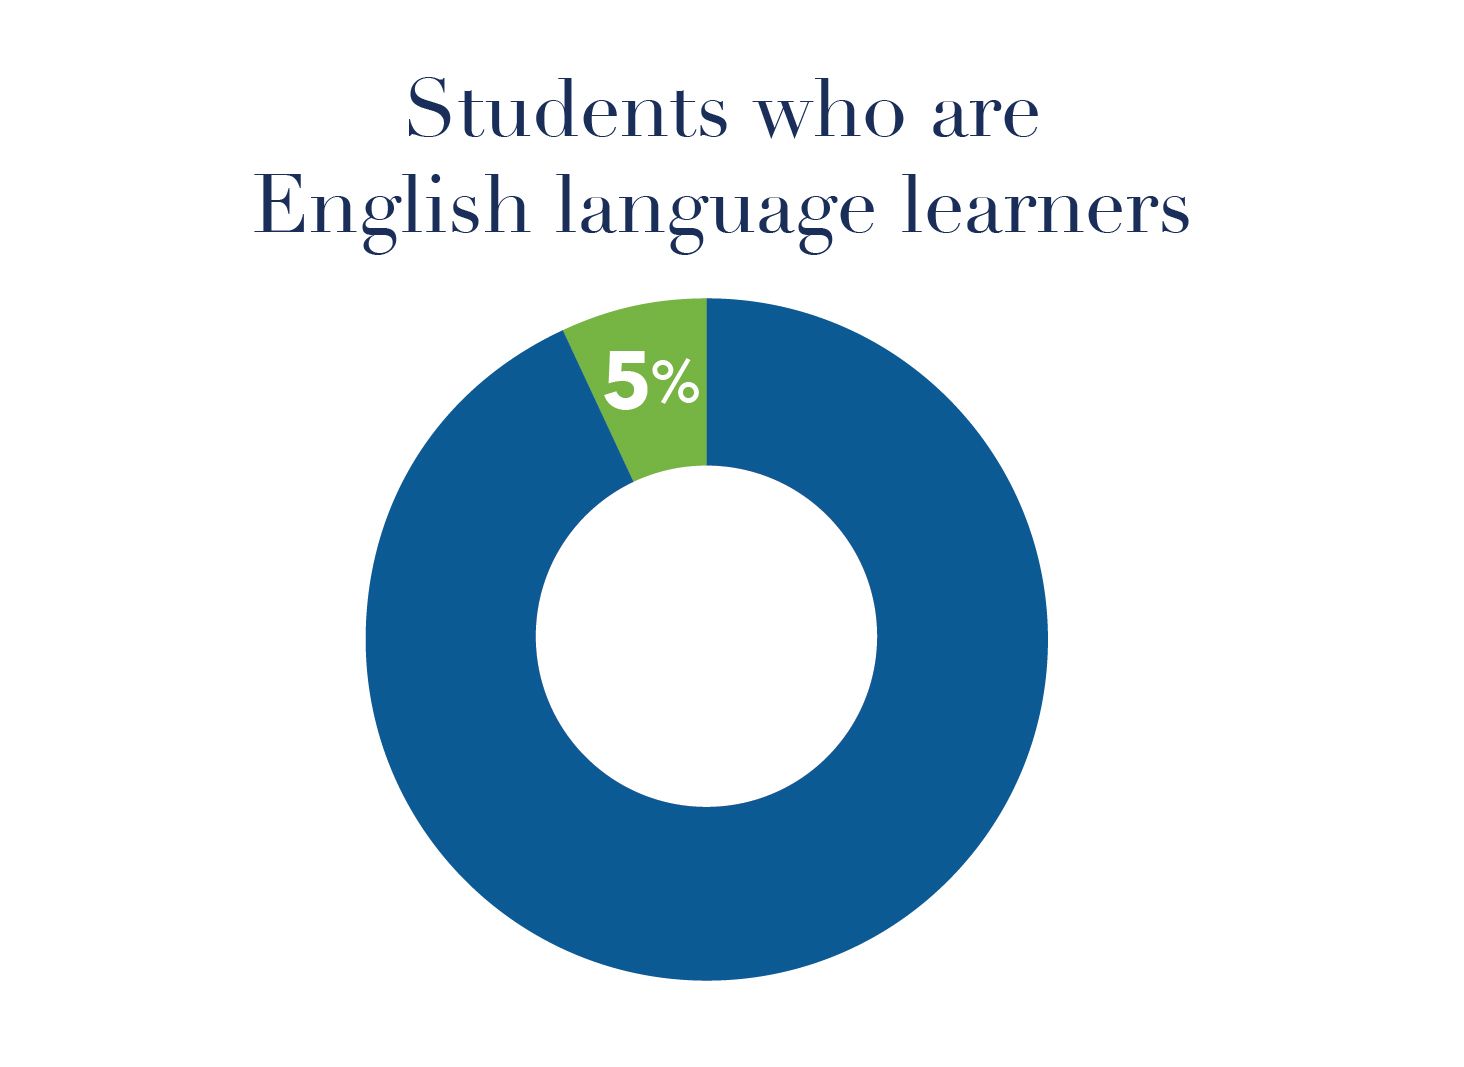 Students who are English language learners